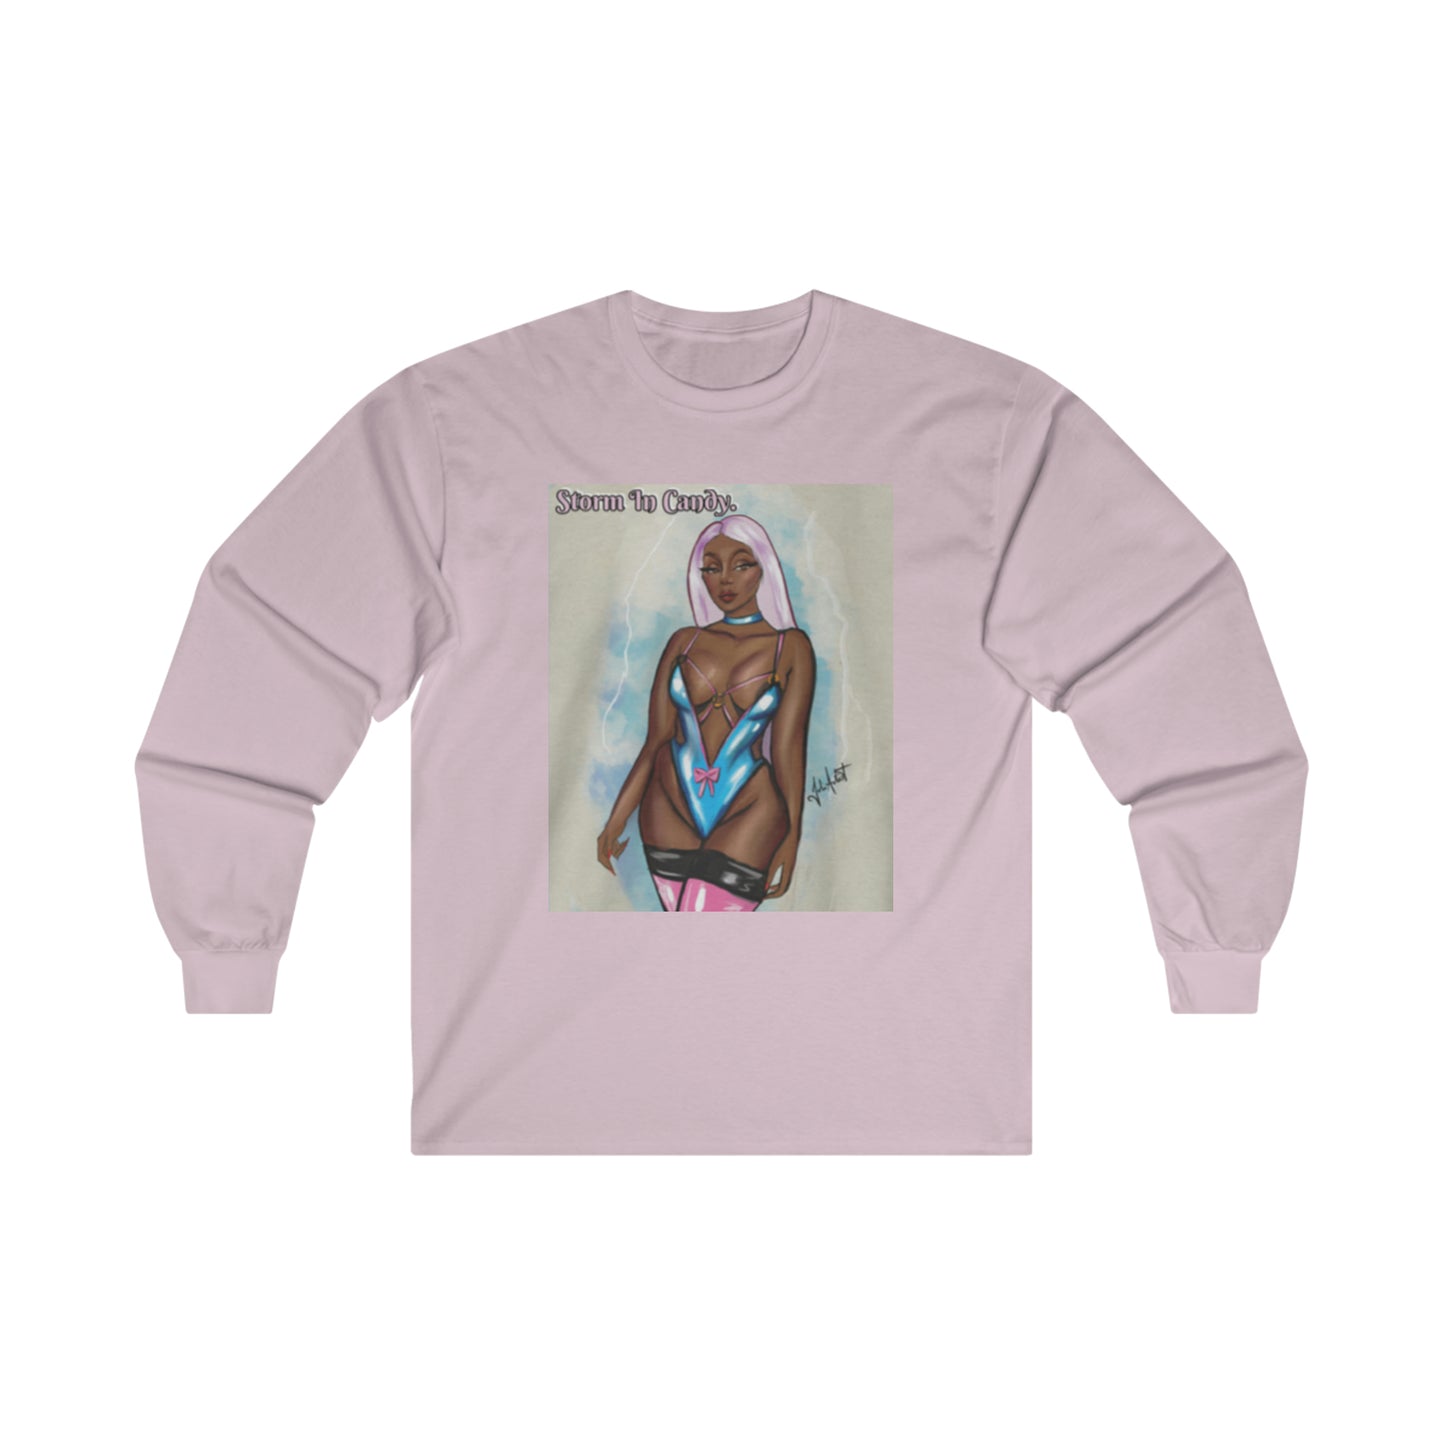 Storm In Candy - Unisex Long Sleeve Tee